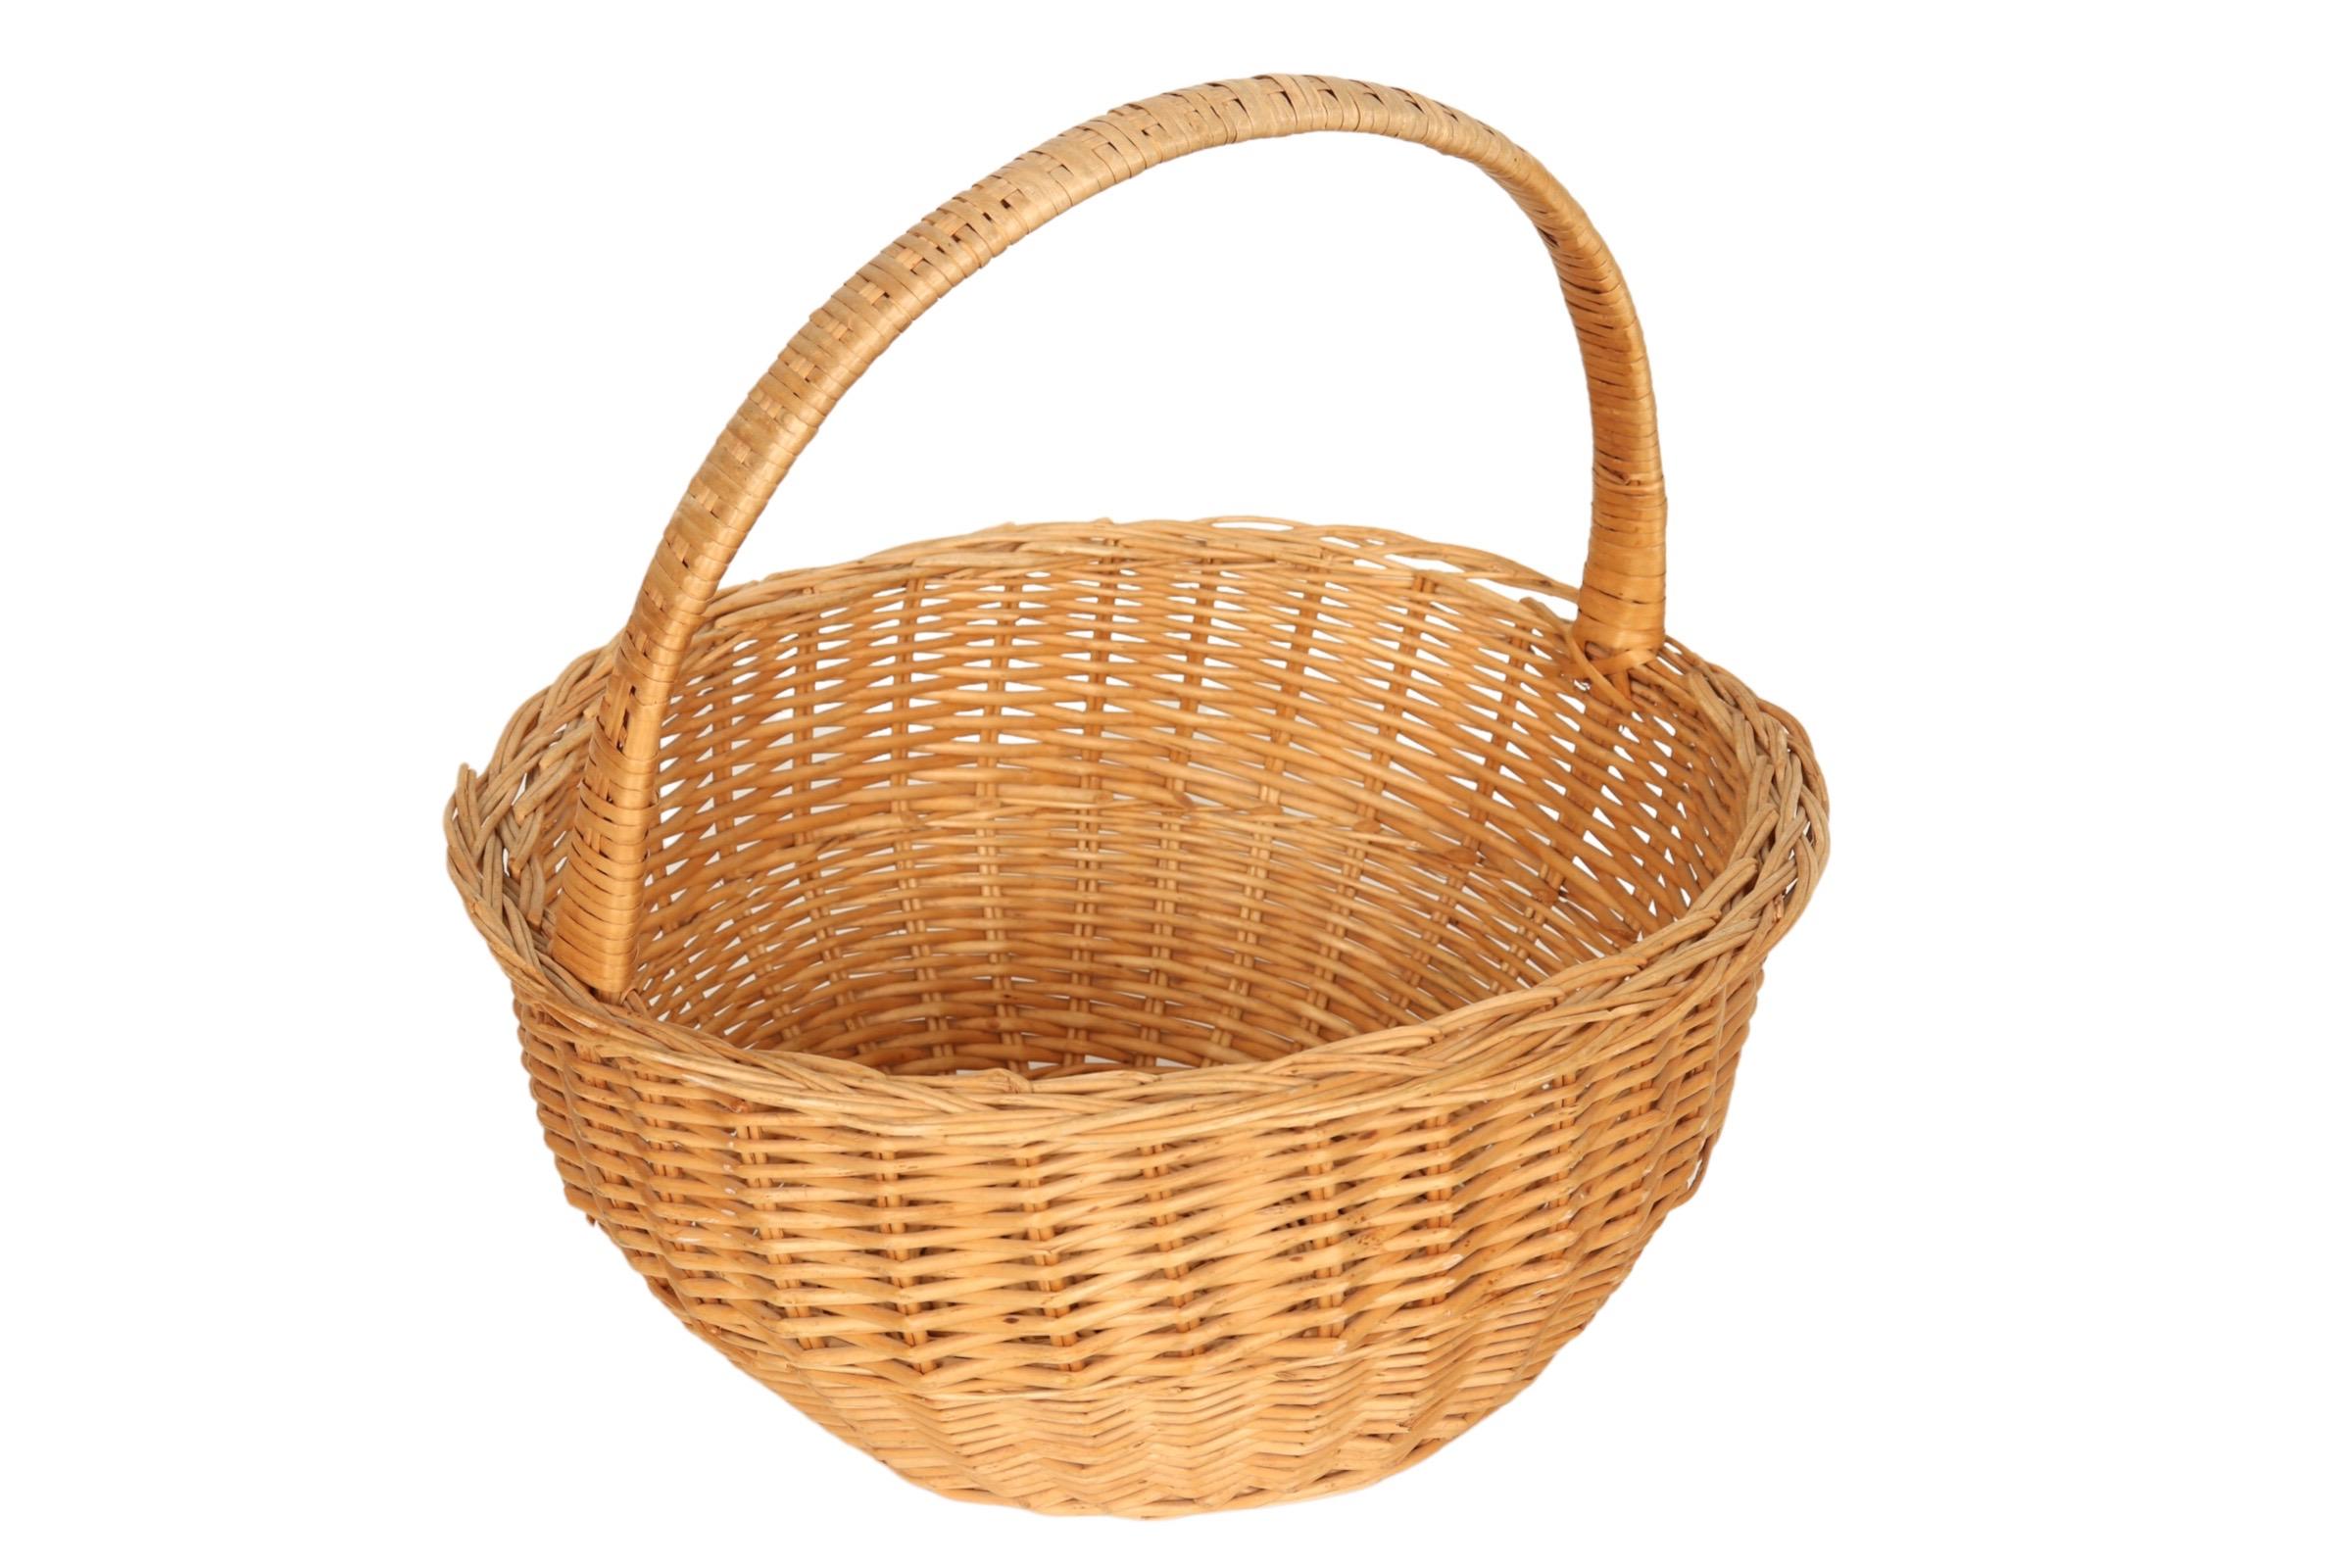 A traditional shopping or gathering basket made of wicker. An arched handle of bentwood bamboo is wrapped with rattan secured to the braided rim of the basket.
 